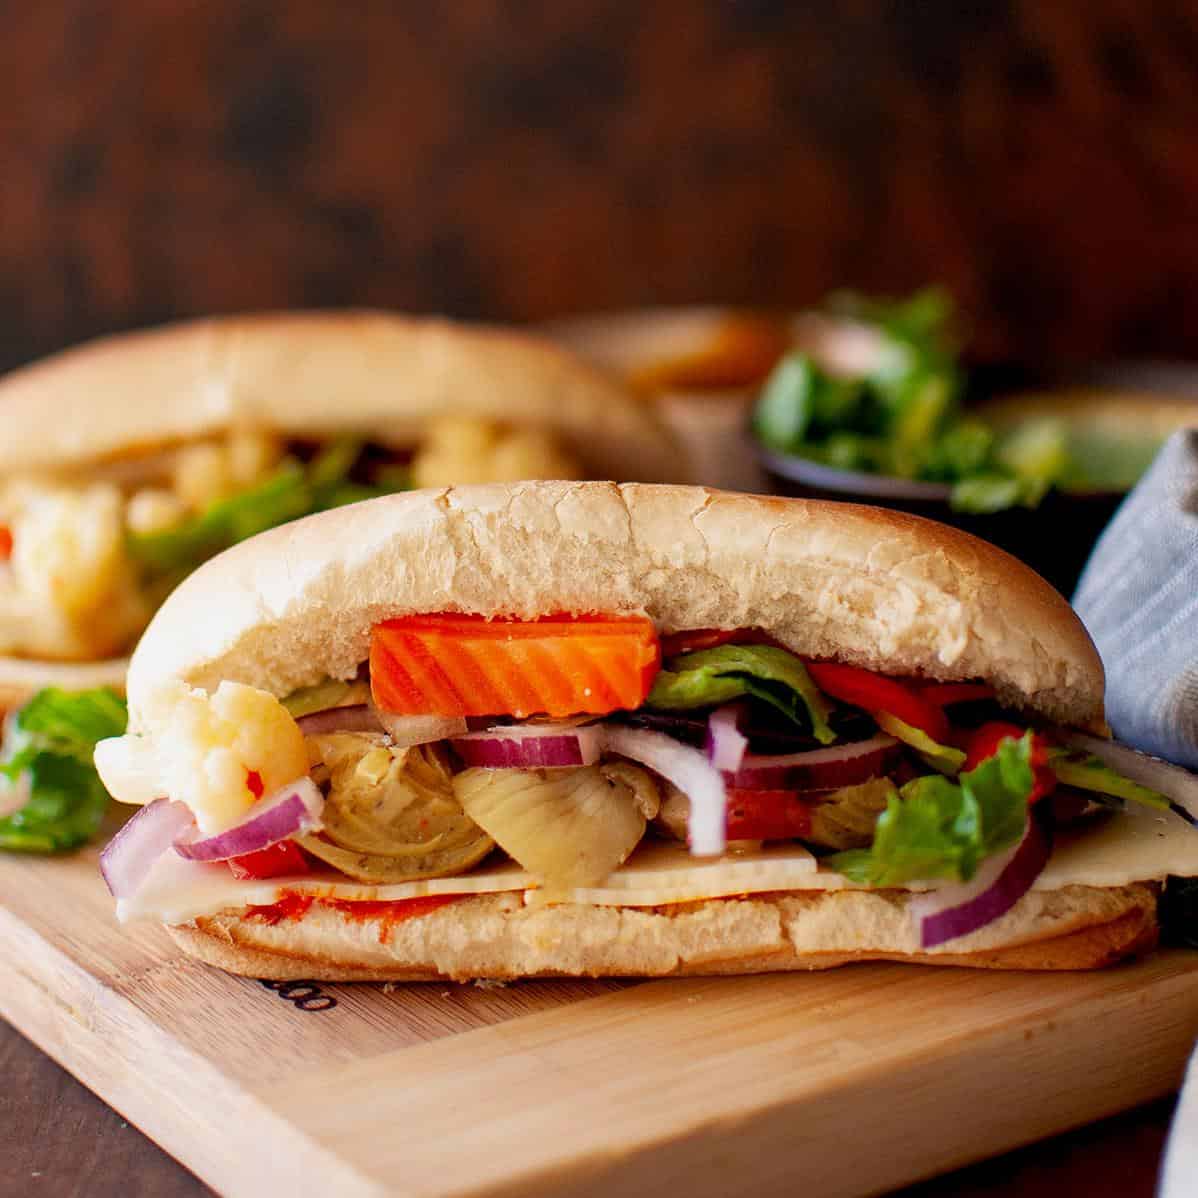  This sandwich is perfect for a satisfying lunch or a quick dinner.